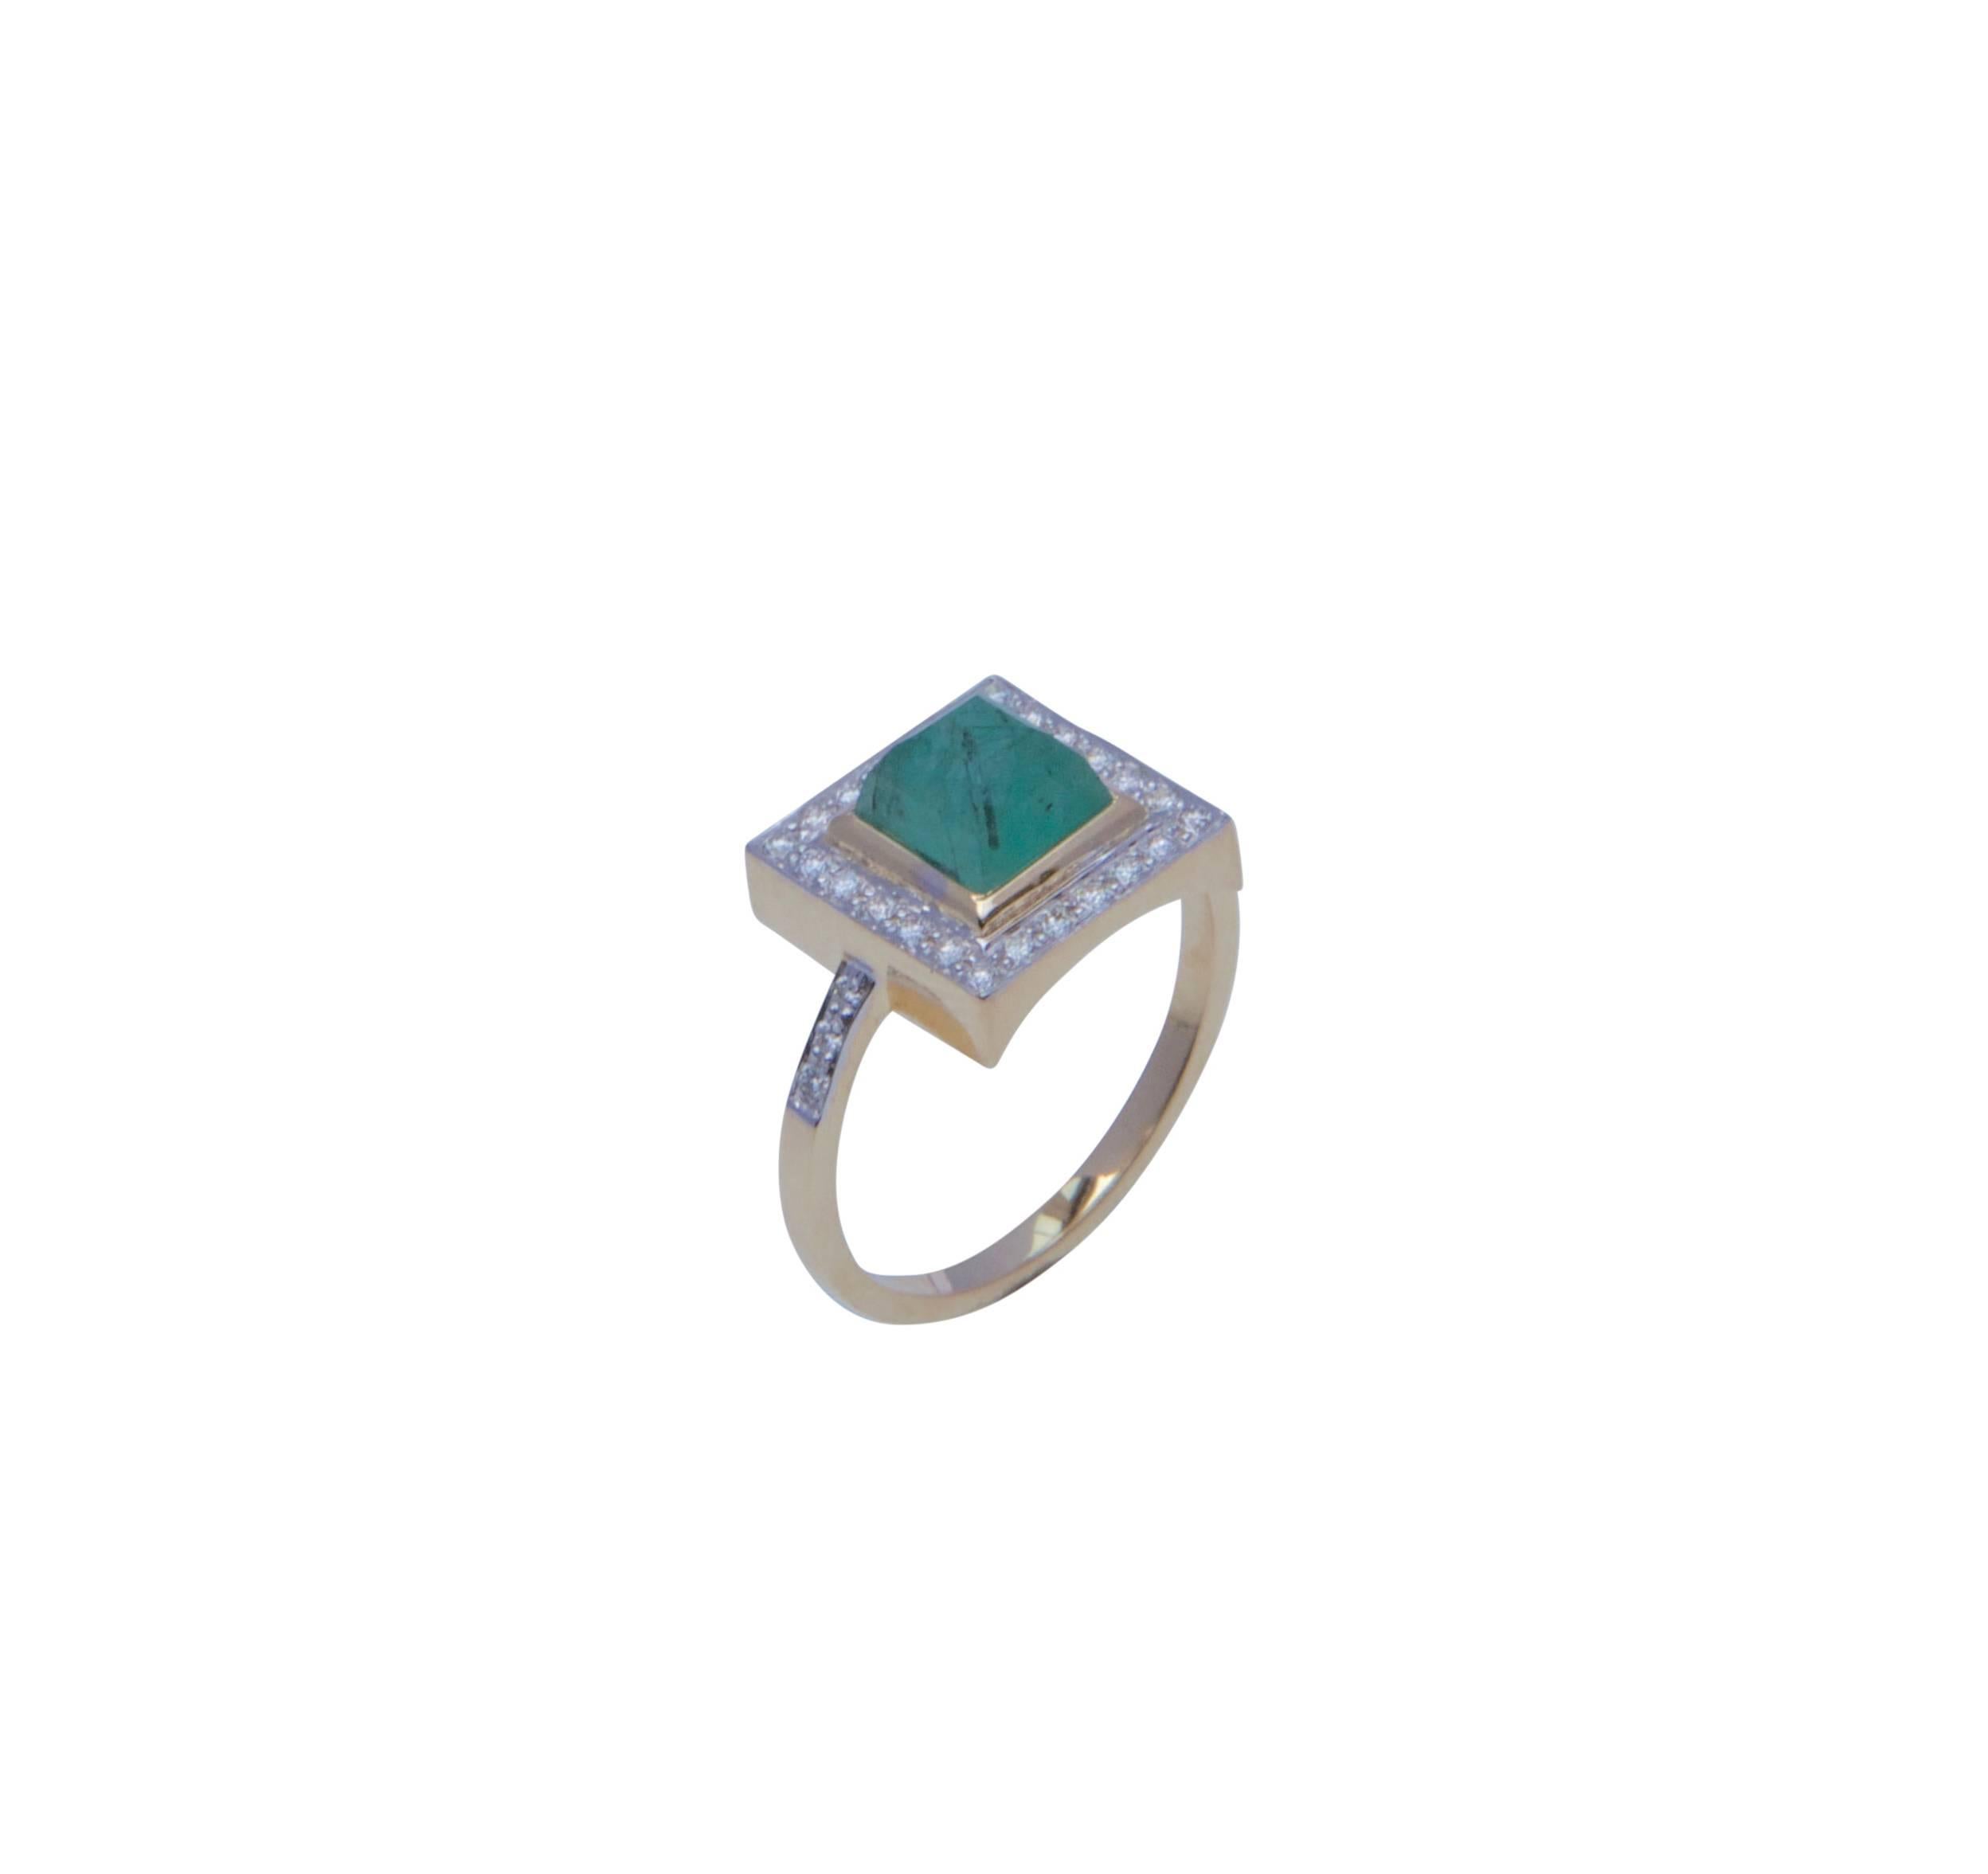 An elegant emerald and diamond ring in 18k yellow gold from the new Neverending Romance Collection. 

Emerald - 2.37 ct      
Diamond - 0.22 ct           